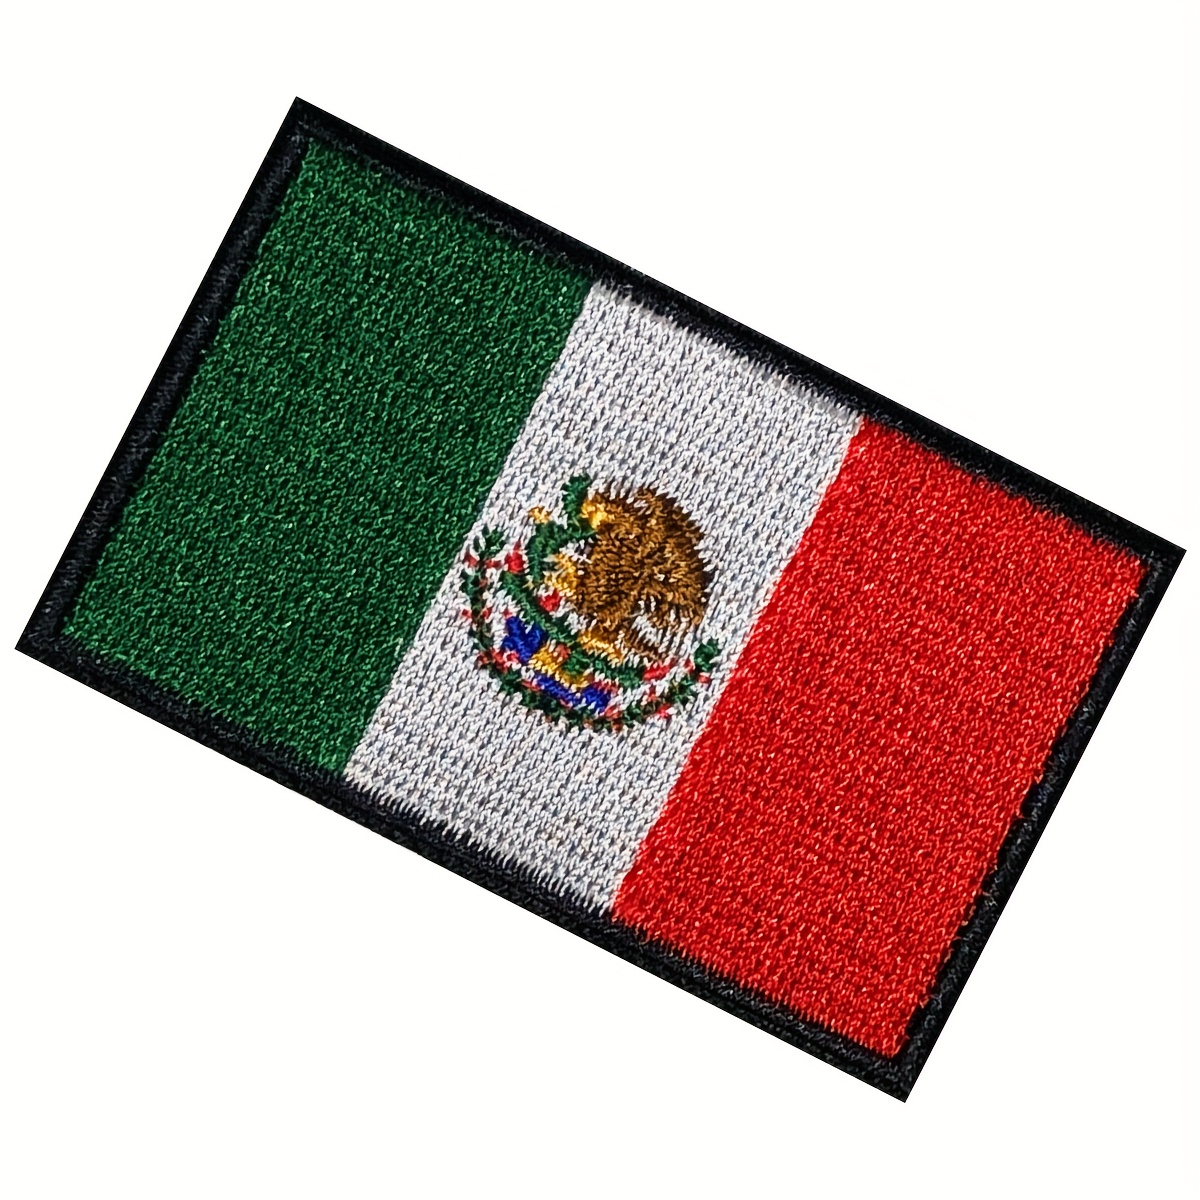 Pemex Guanajuato mexico Embroidered Iron On Patch for hats etc